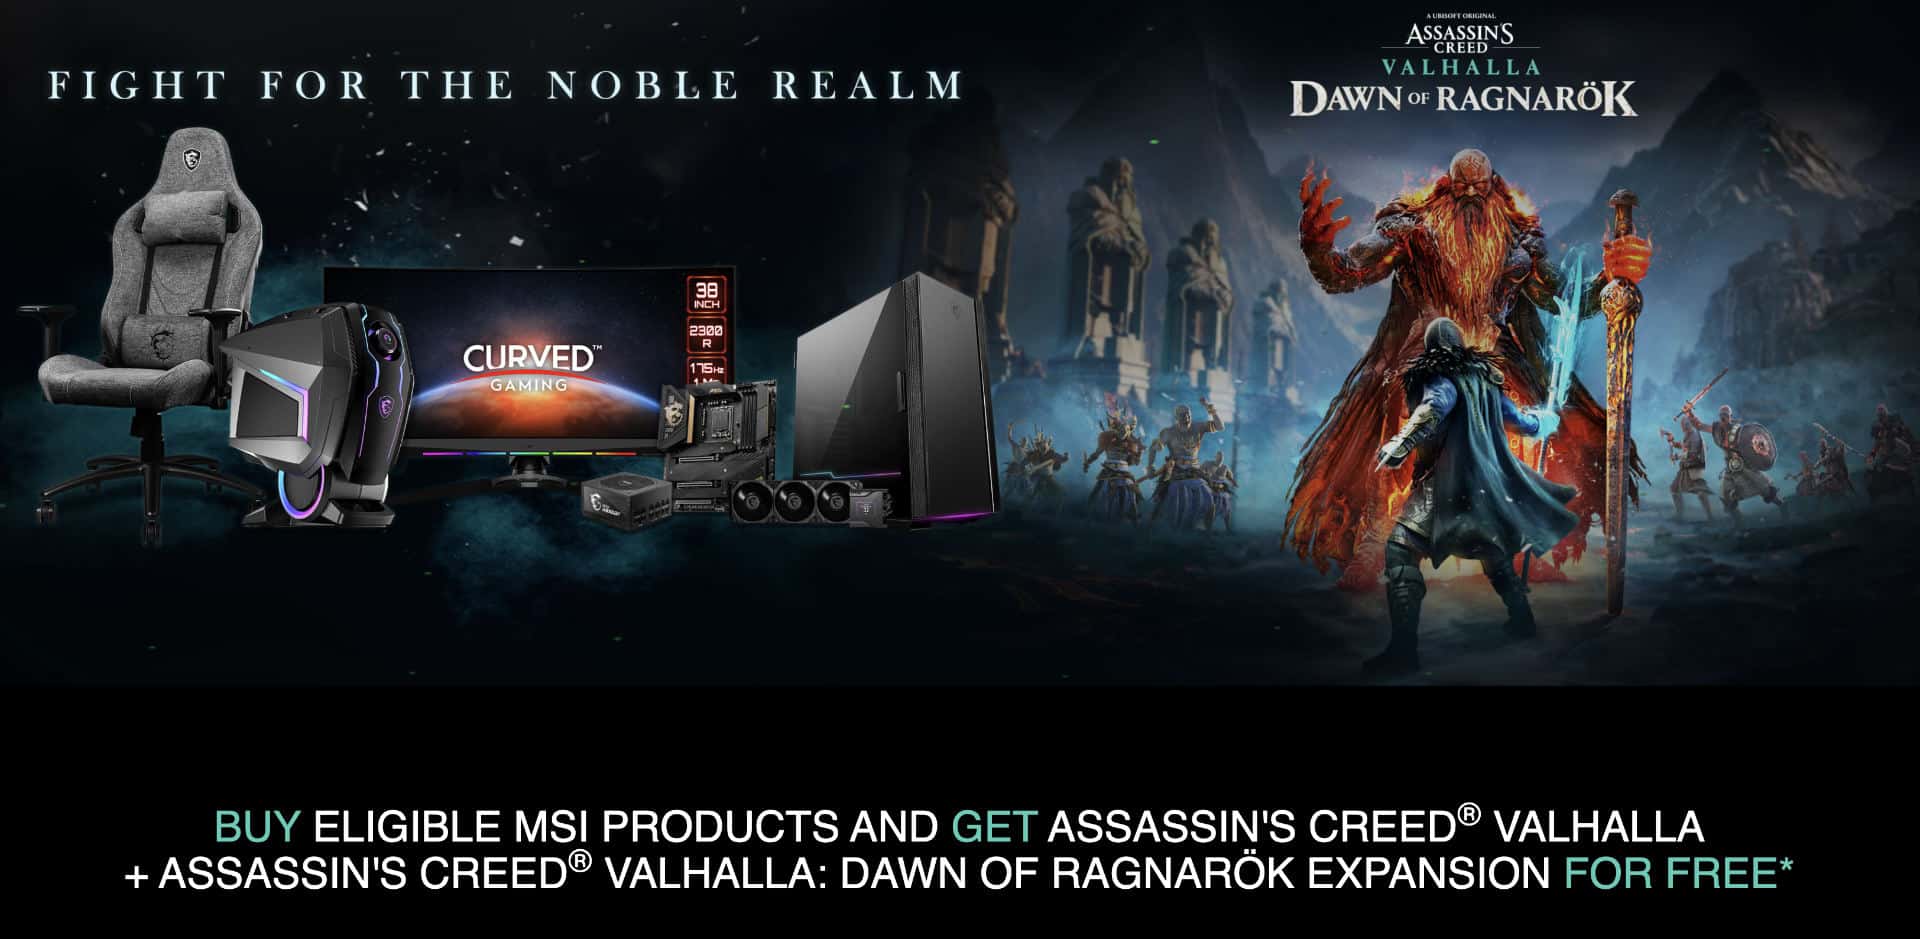 Buy Participating MSI Products and Get Assassin’s Creed: Valhalla + Dawn of Ragnarok Free